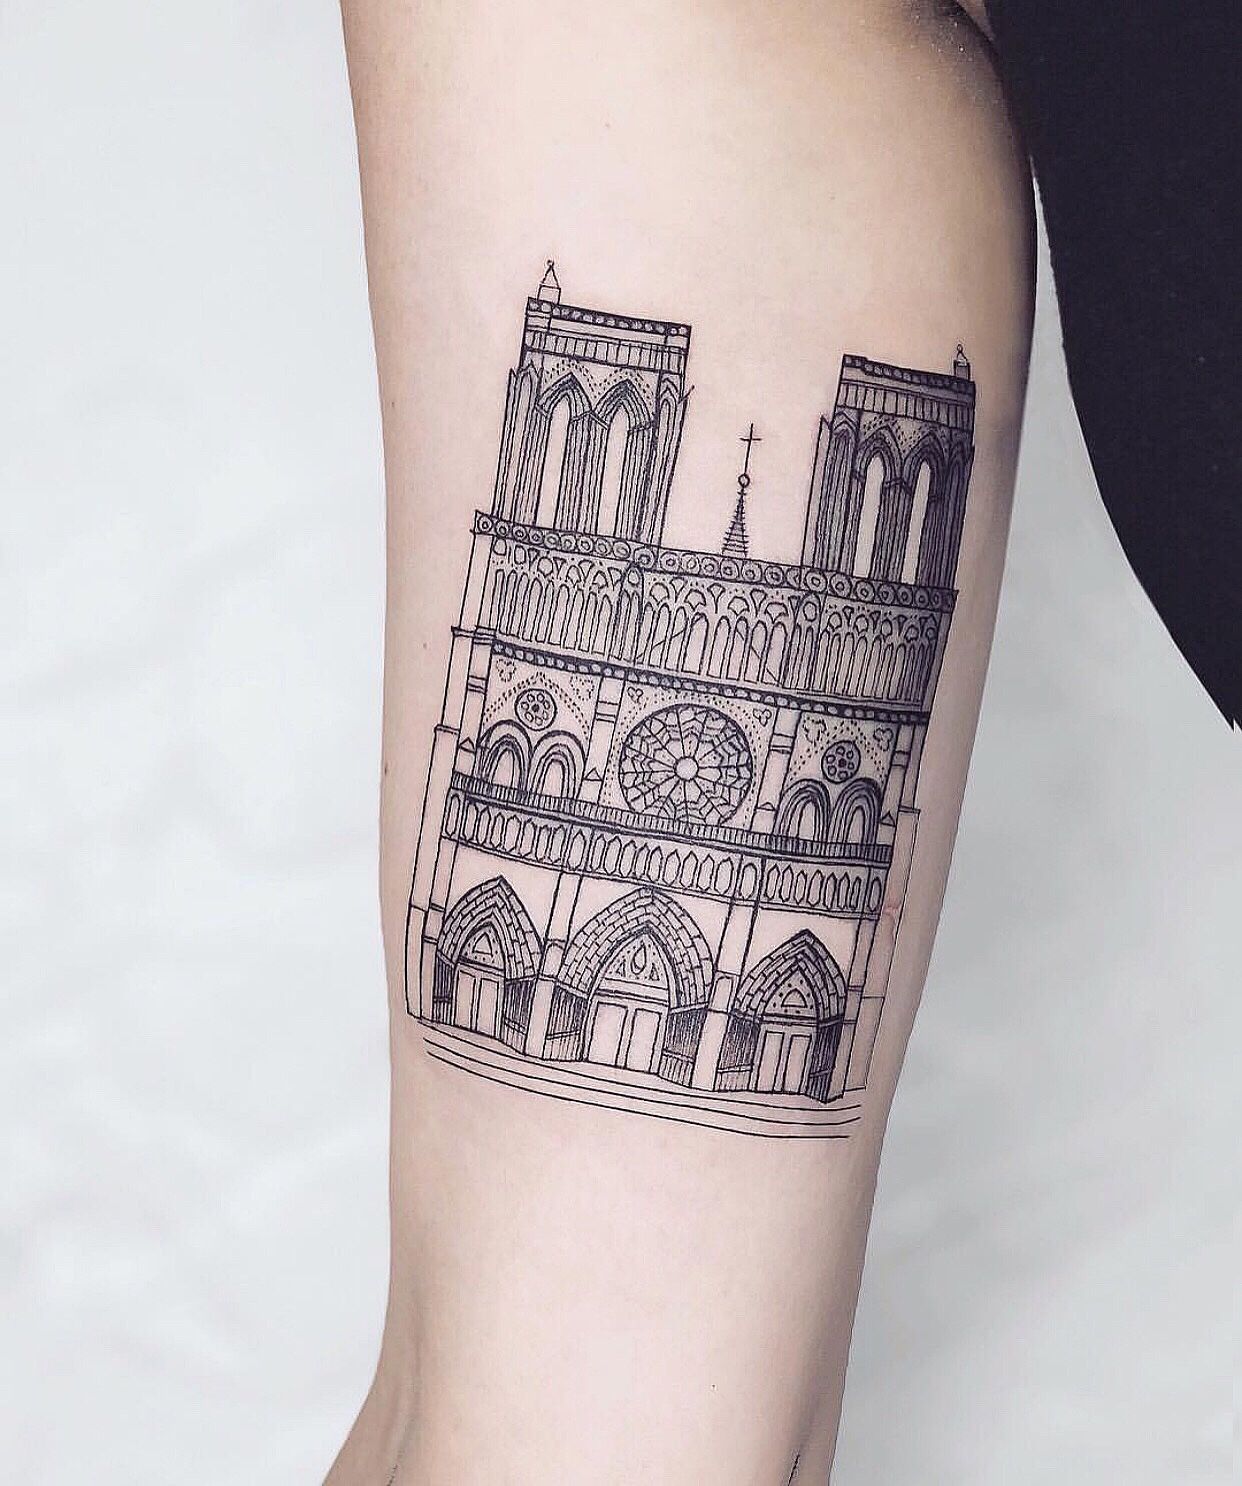 ND Tattoo ideas  Irish Envy  Notre Dame Football Discussion